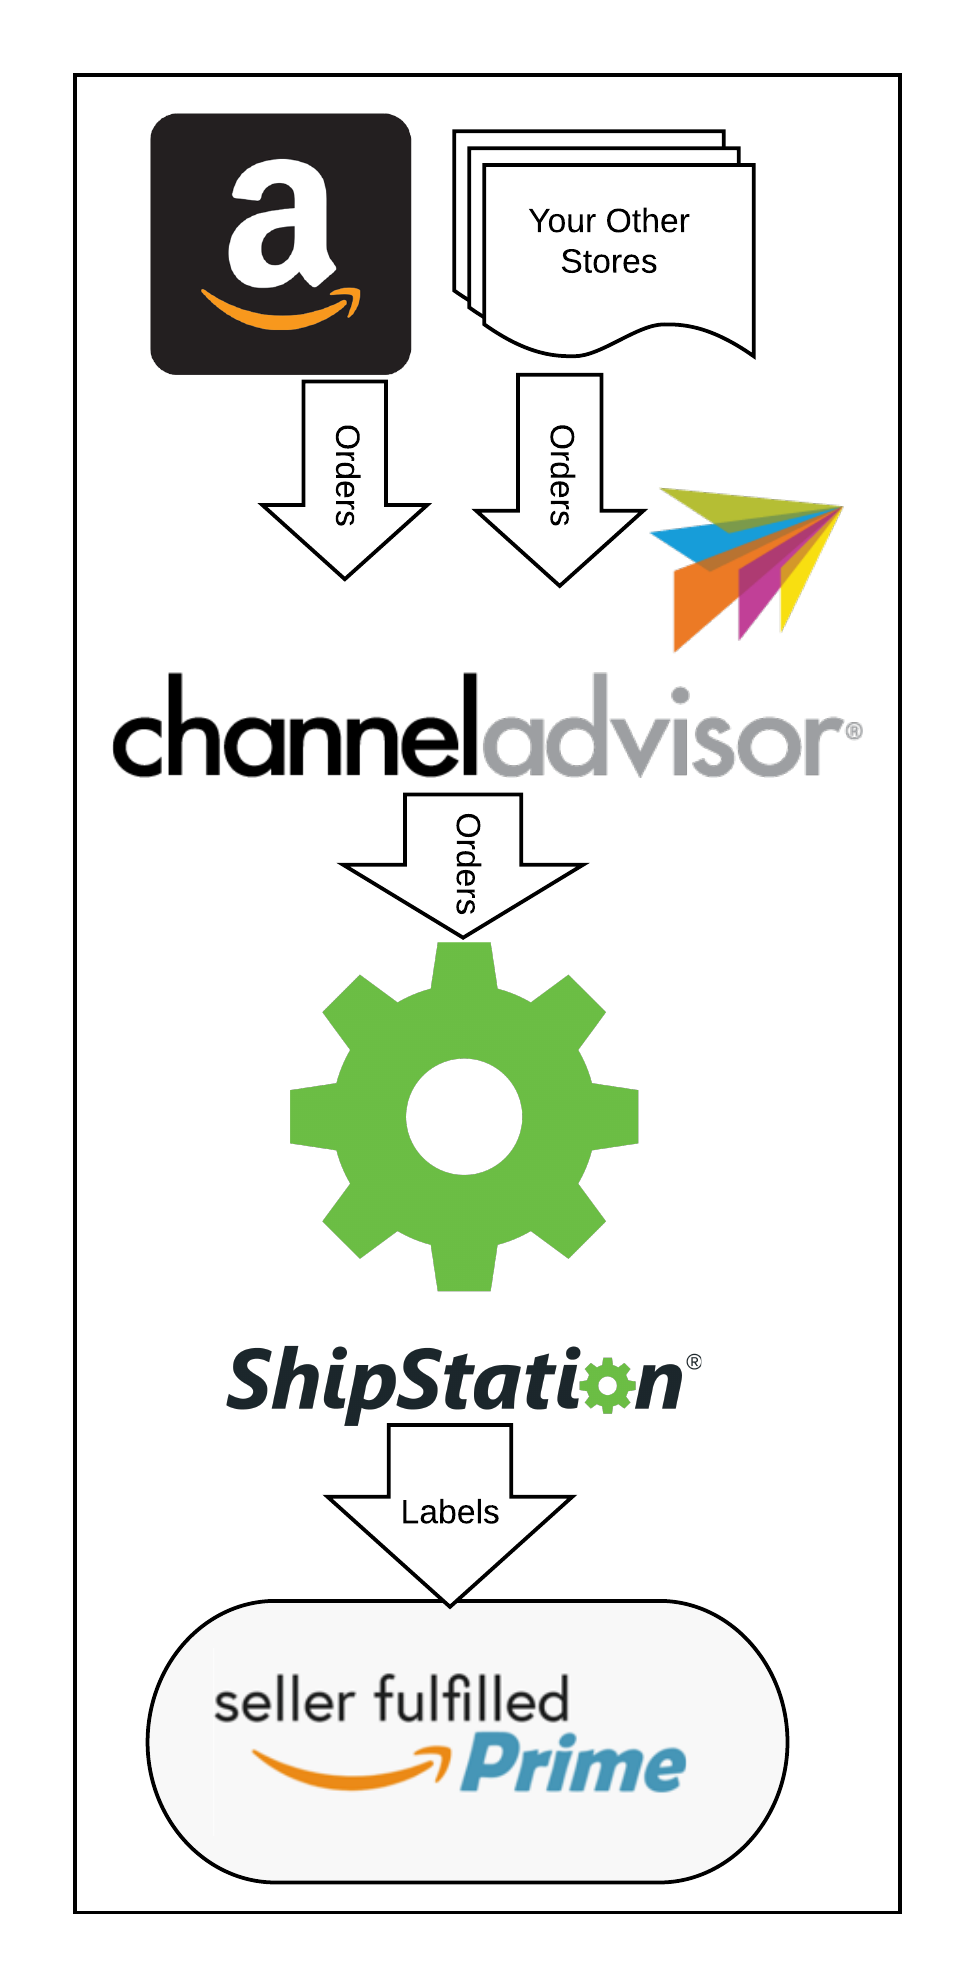 Flowchart showing how orders import from Amazon to ChannelAdvisor to ShipStation to create Seller Fulfilled Prime labels